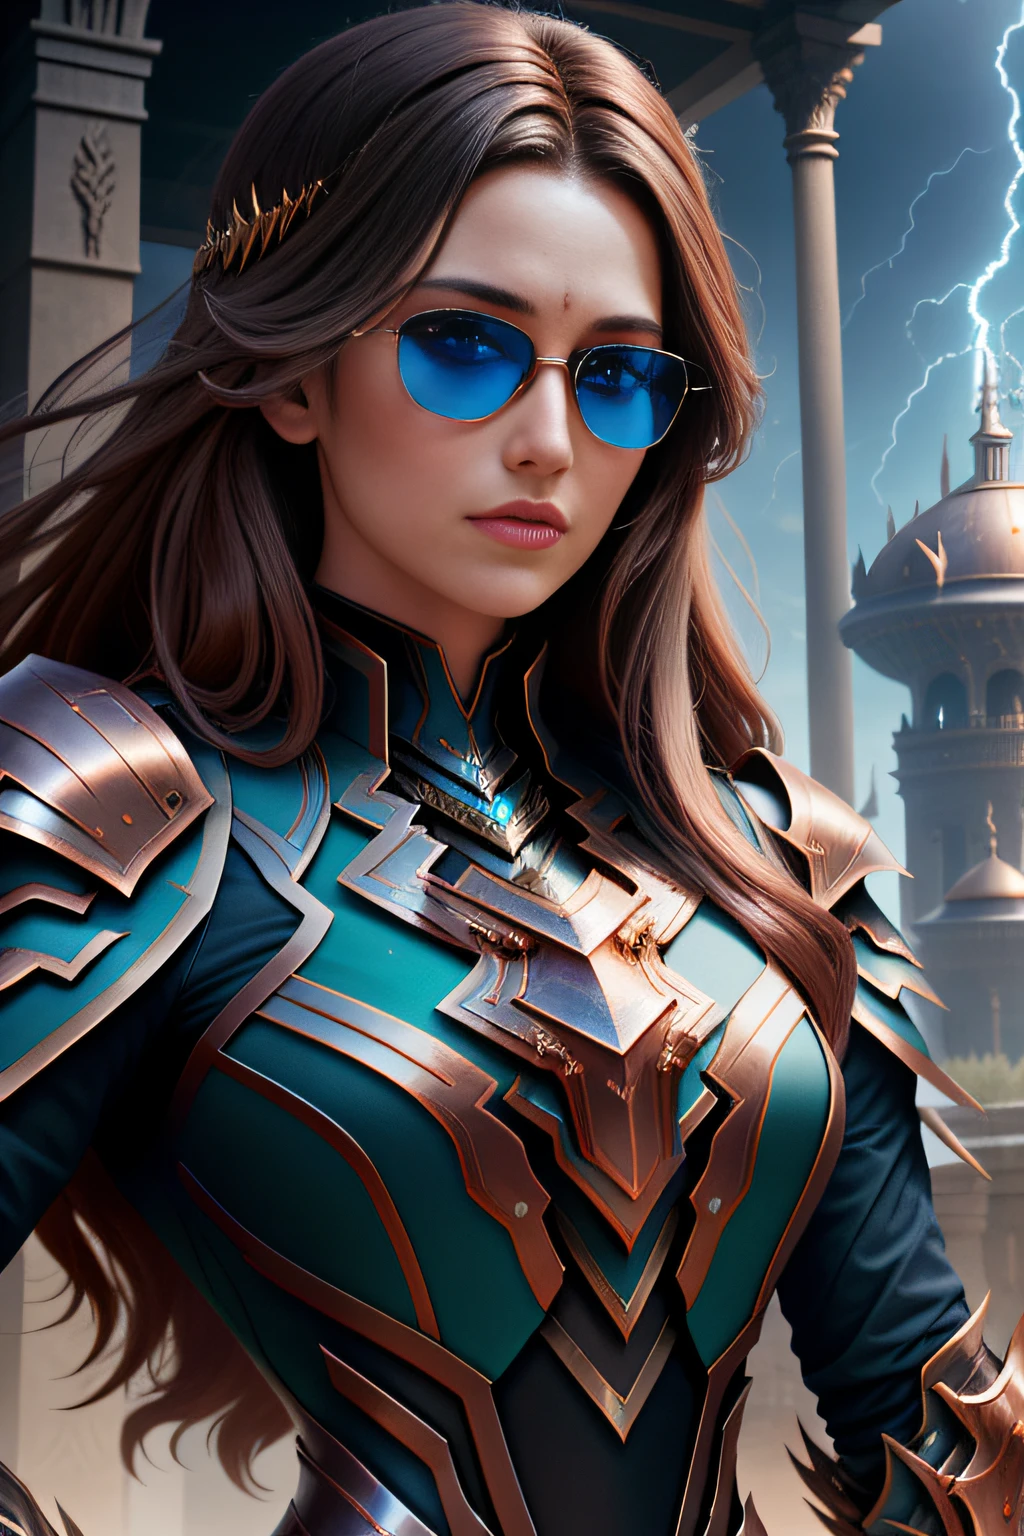 Elastic photos [Siren|sorceress woman] , Thunderball, An armored woman wearing sunglasses,salama ,wearing edgThunderstruck_Armor, electrified, weilding thunder, Perfect face, Pretty face, Brown eyes, copper-haired, Big hair, Flat chest, lush detailing, absurderes,